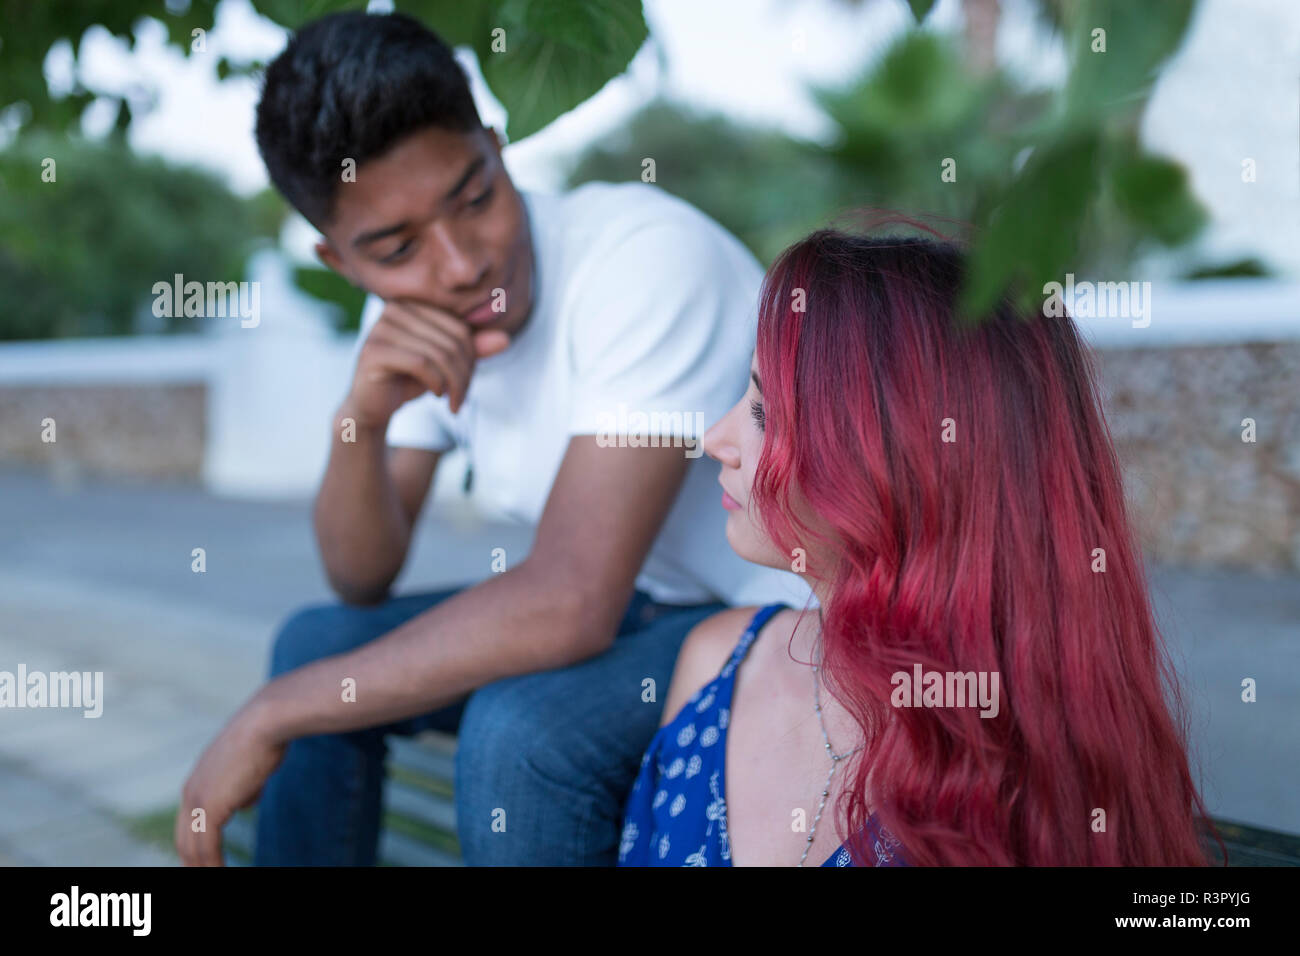 Young woman with dyed red hair sitting on bench with her boyfriend Stock Photo